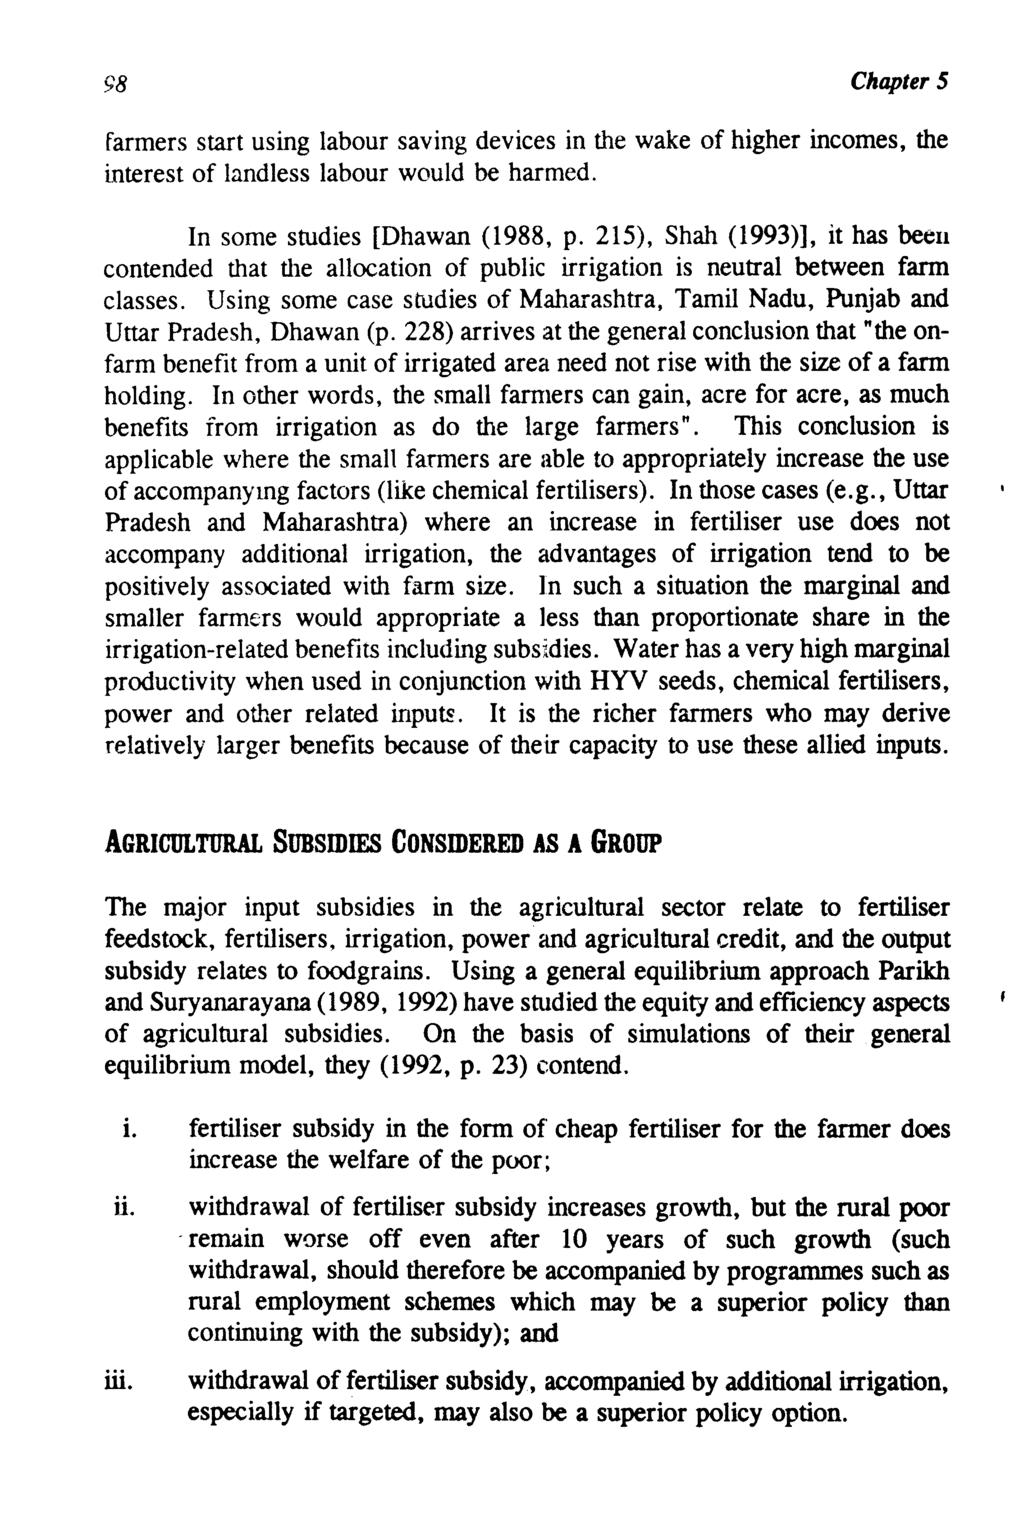 98 Chapter 5 farmers start using labour saving devices in the wake of higher incomes, the interest of landless labour would be harmed. In some studies [Dhawan (1988, p.